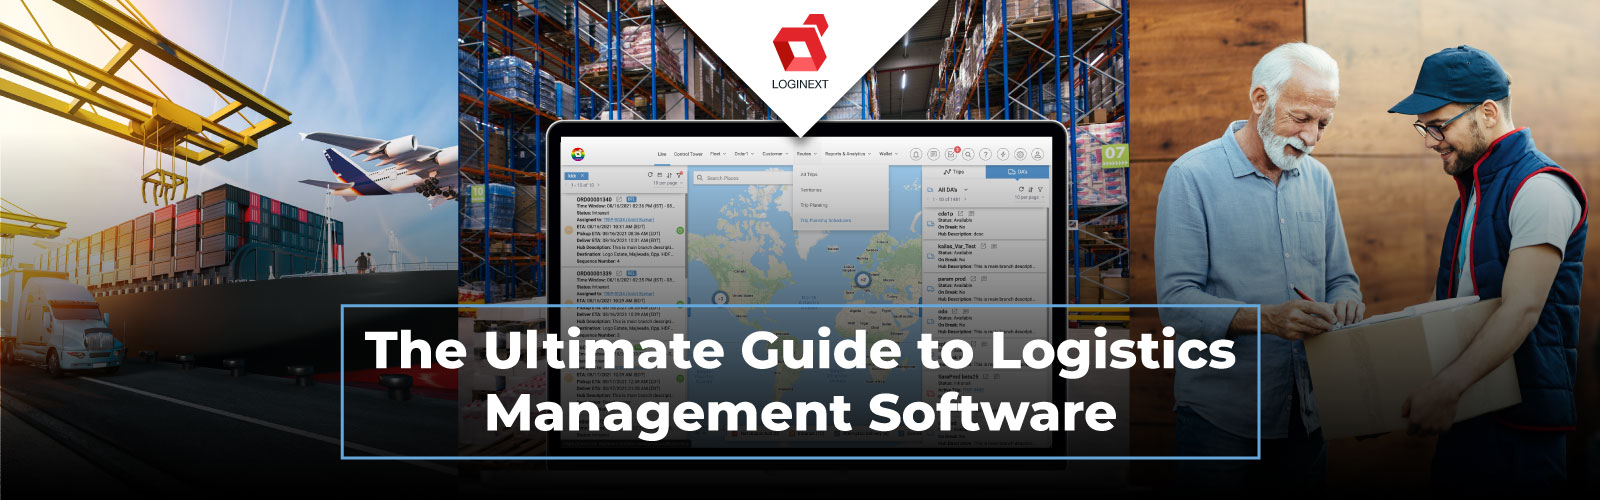 The Ultimate Guide to Logistics Management Software